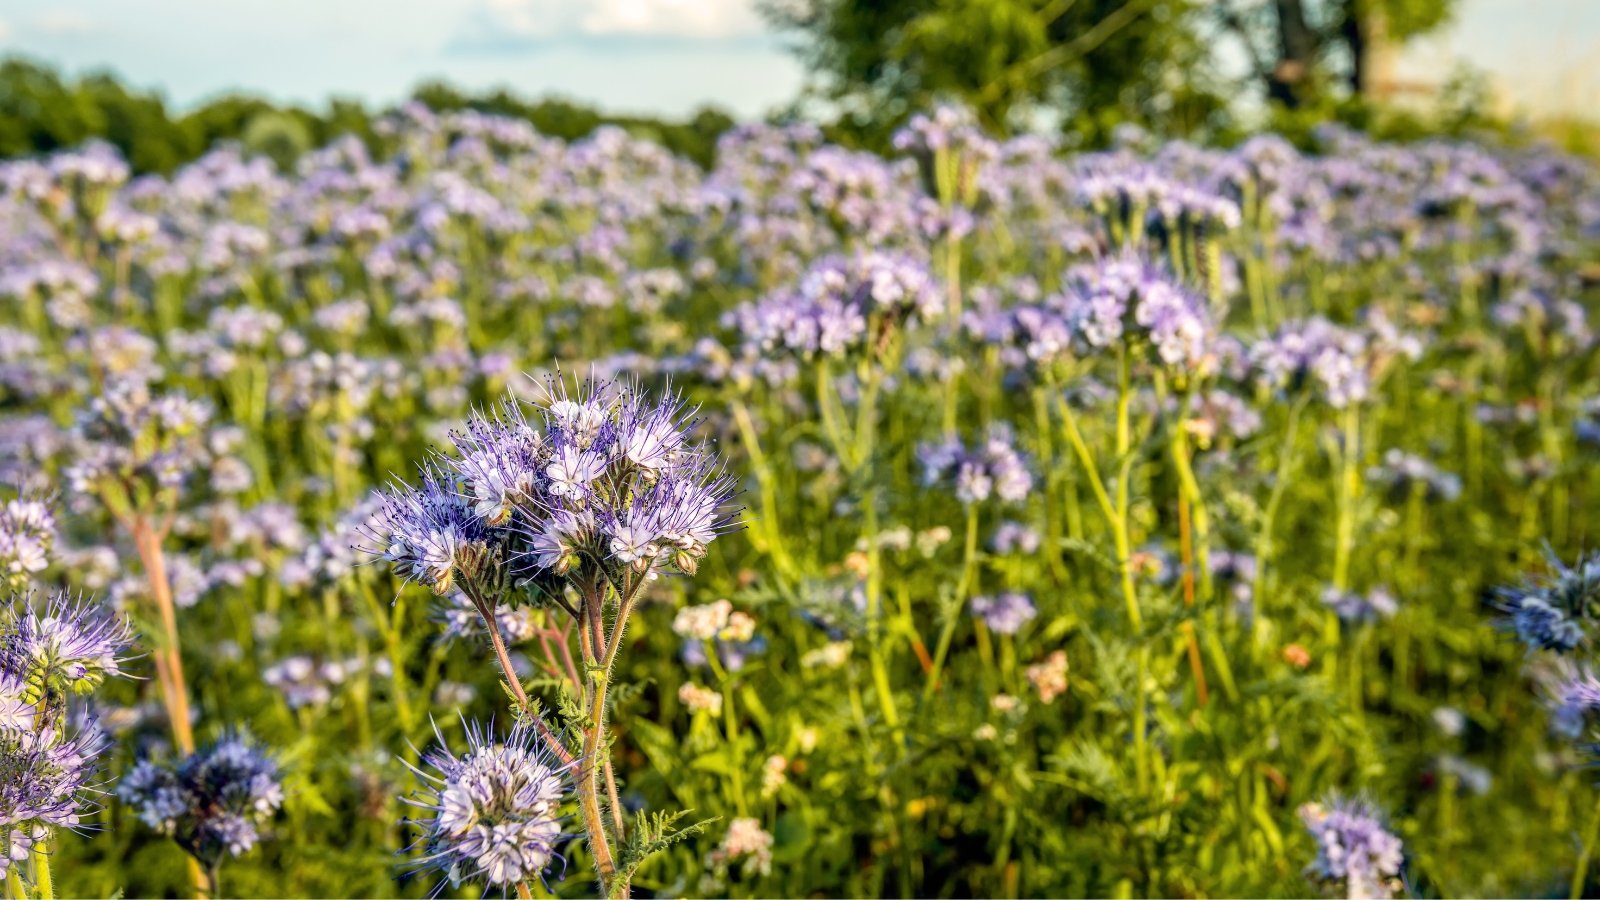 Close-up of flowering lacy phacelia plants in a sunny garden, displaying delicate, fern-like foliage adorned with clusters of small, purple-blue flowers